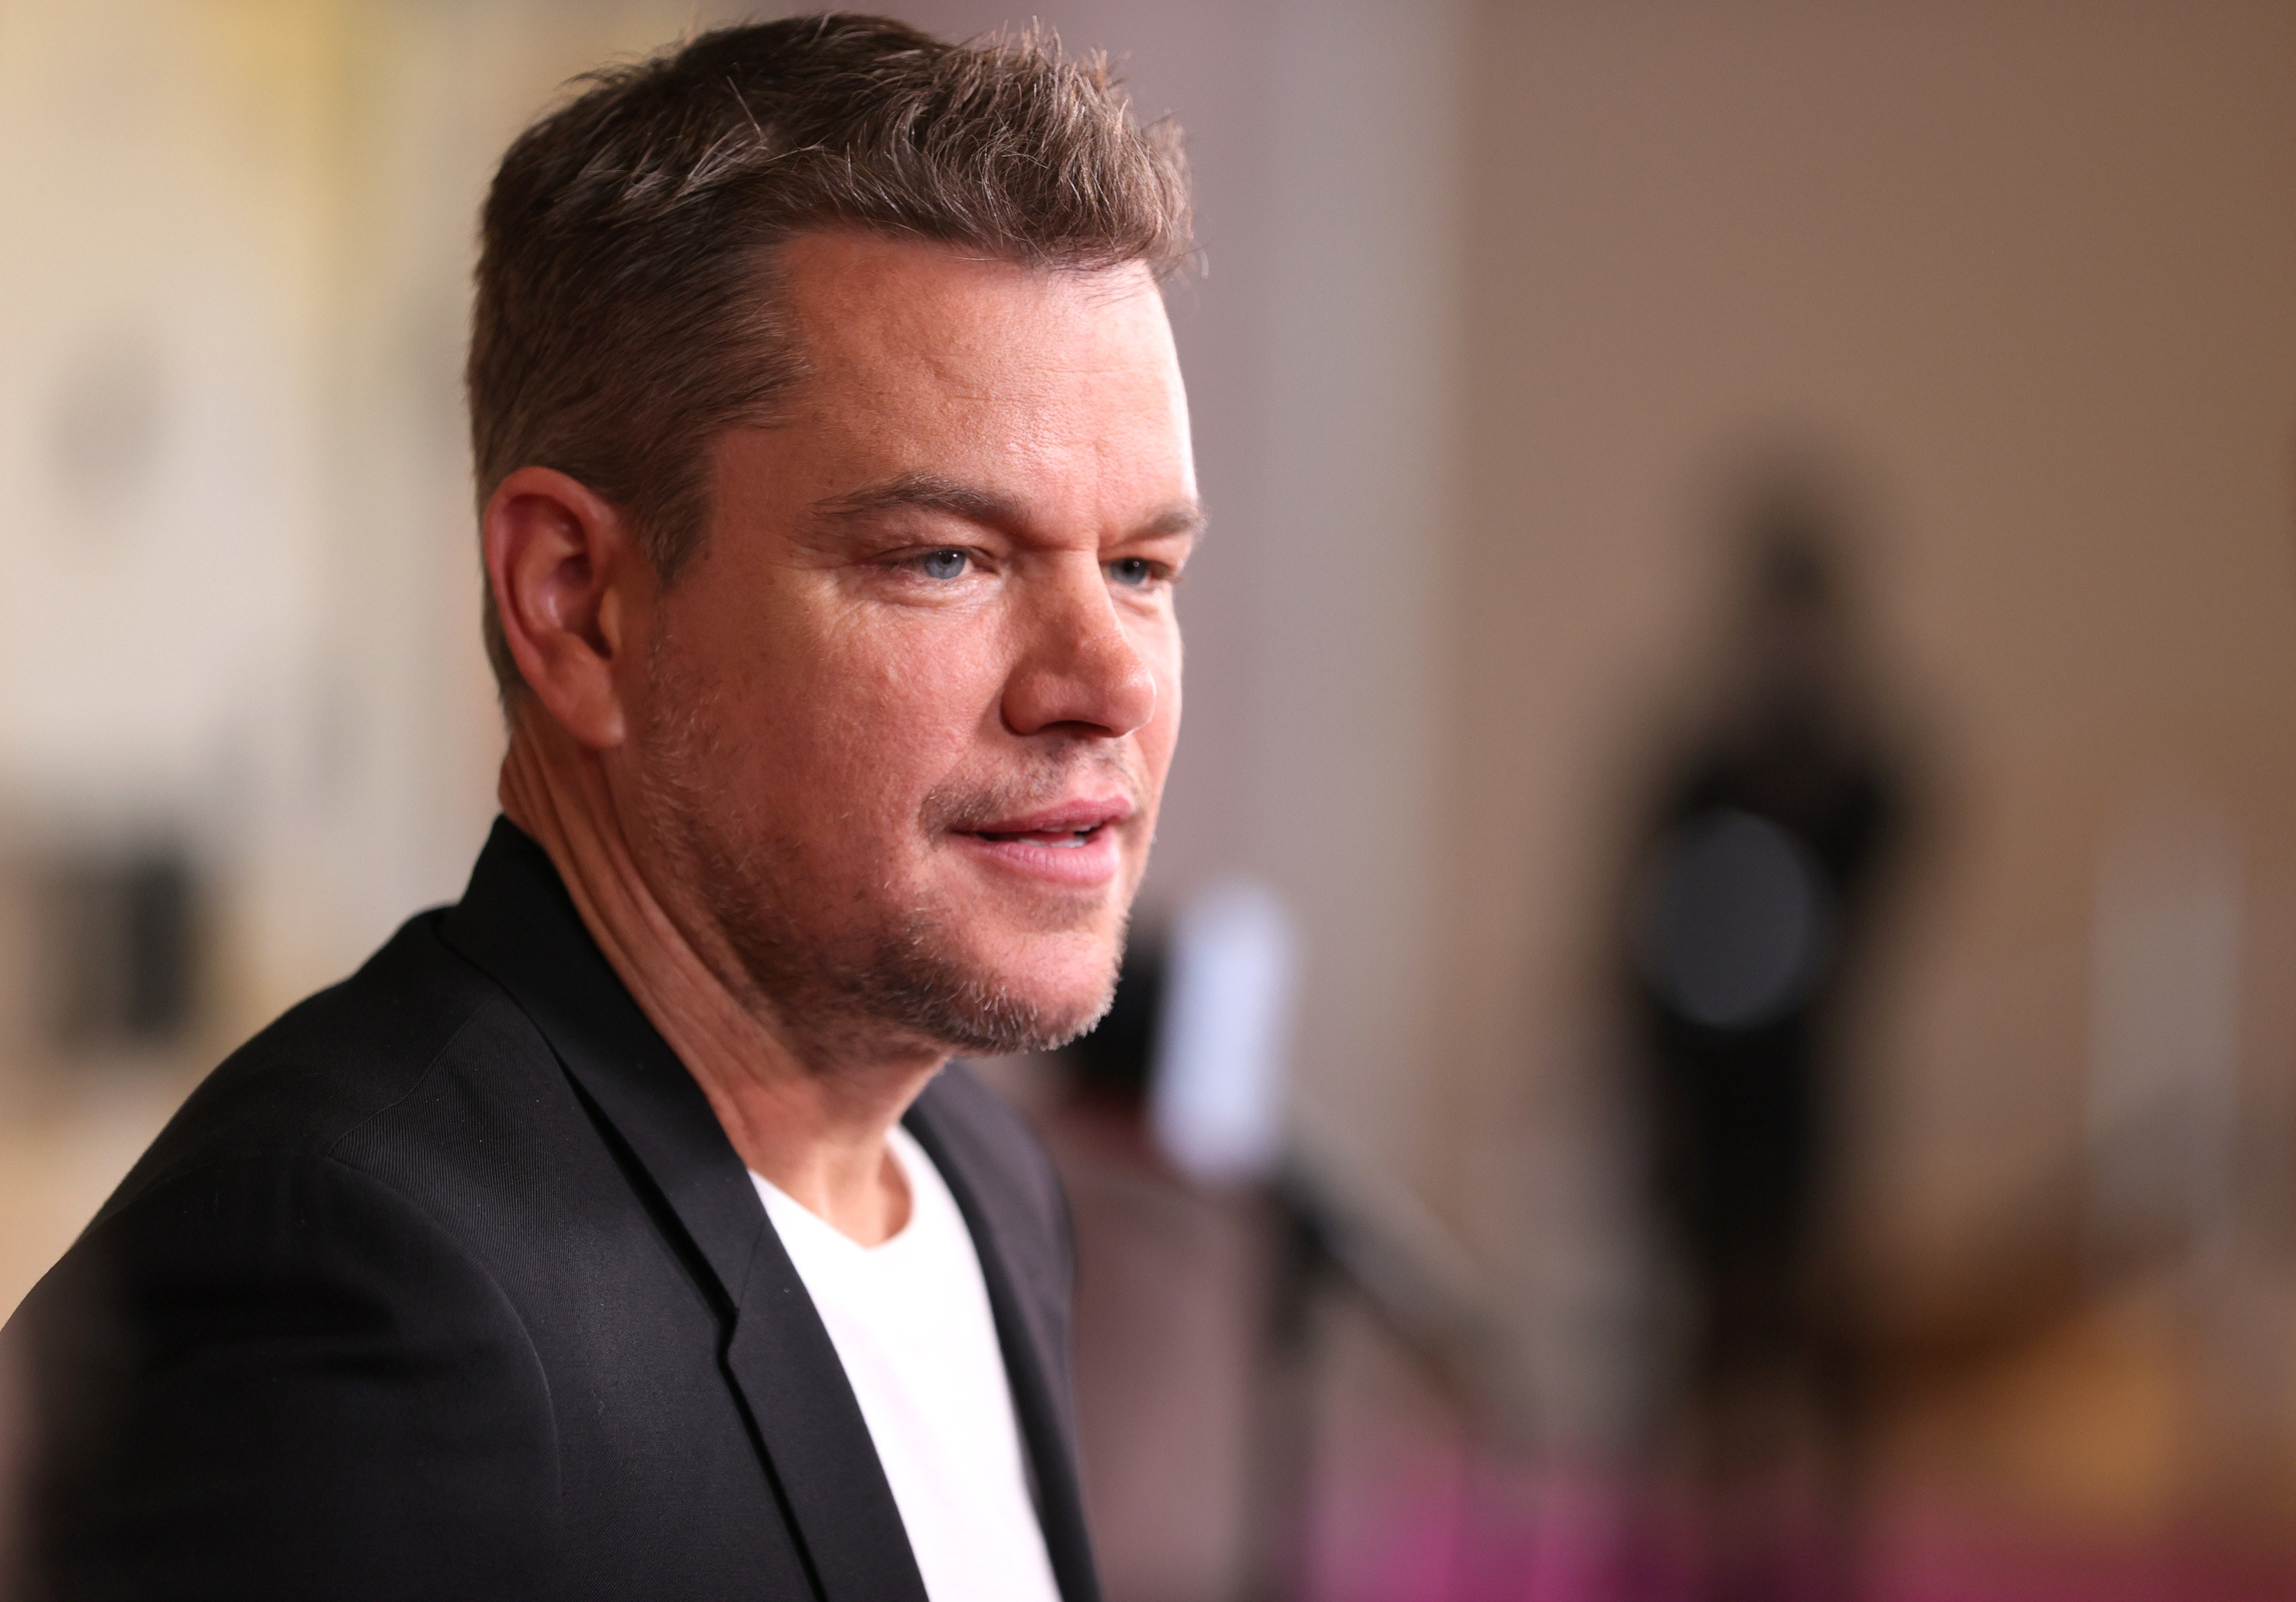 Matt Damon is photographed at a movie premiere in New York City